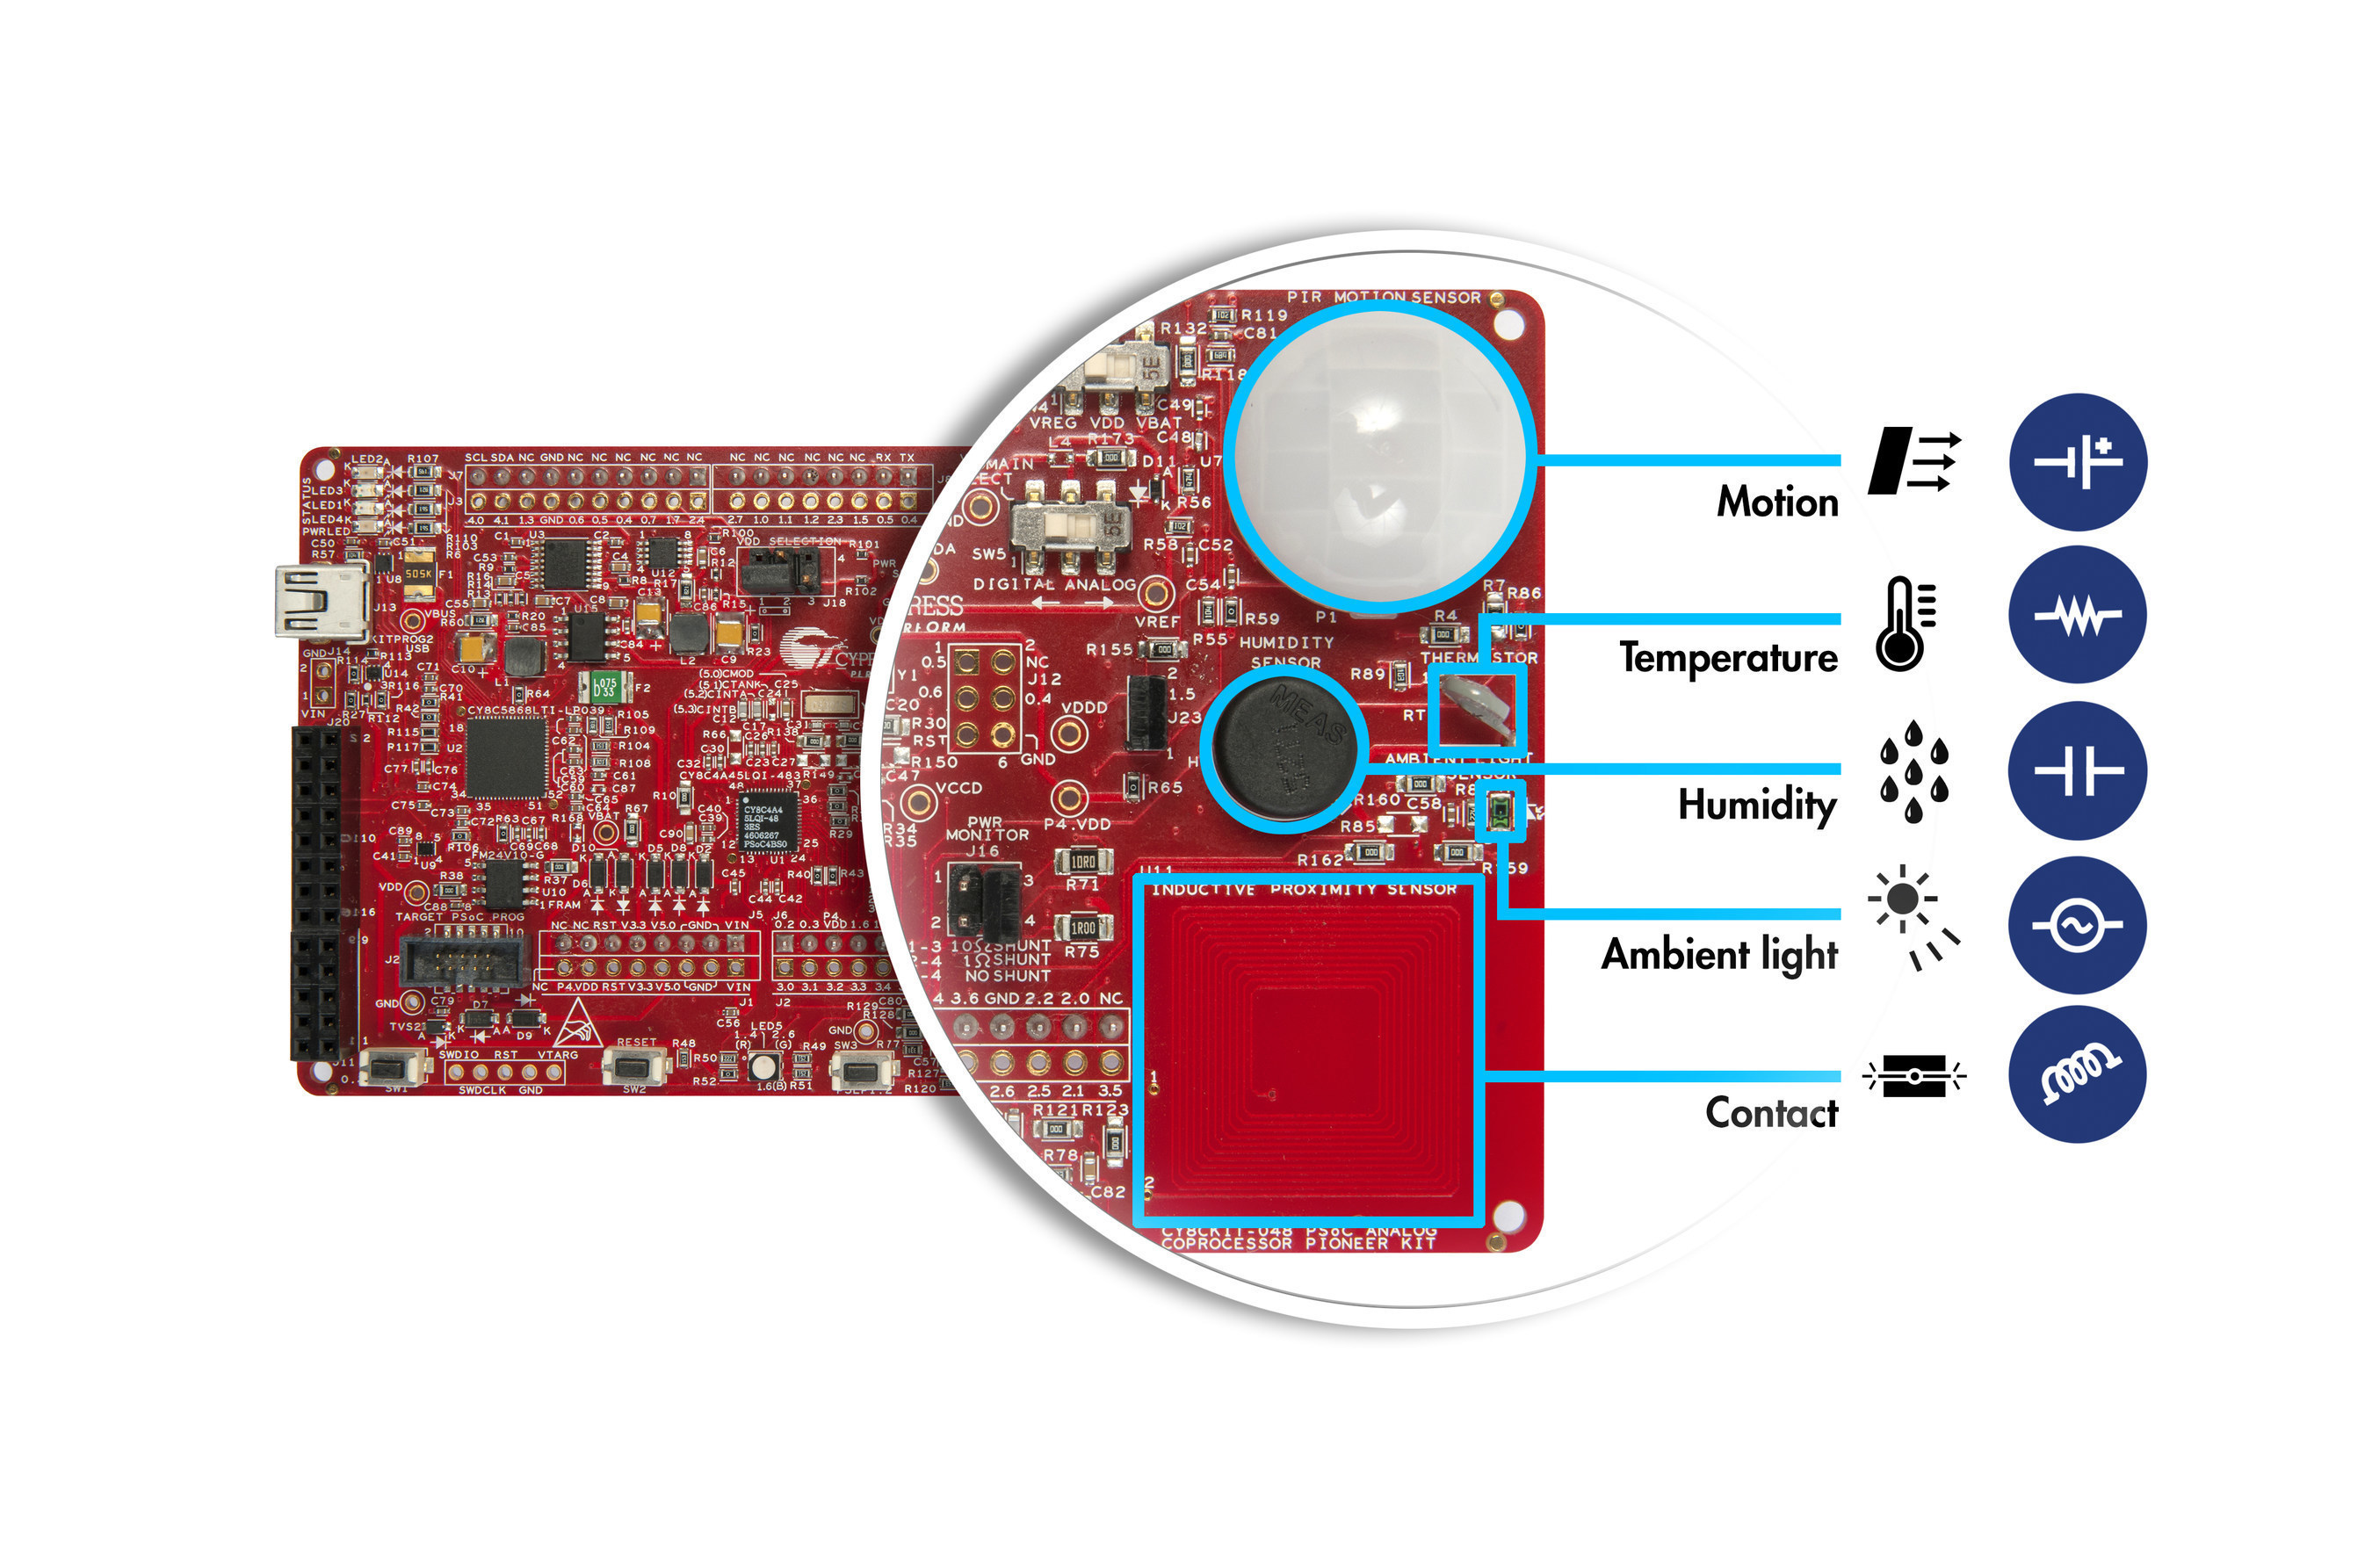 Pictured is Cypress's PSoC Analog Coprocessor Pioneer Kit (CY8CKIT-048), which simplifies evaluation of the PSoC Analog Coprocessor.  The kit is available for $49 and includes a PIR motion sensor, a humidity sensor, a thermistor, an inductive proximity sensor and an ambient light sensor.